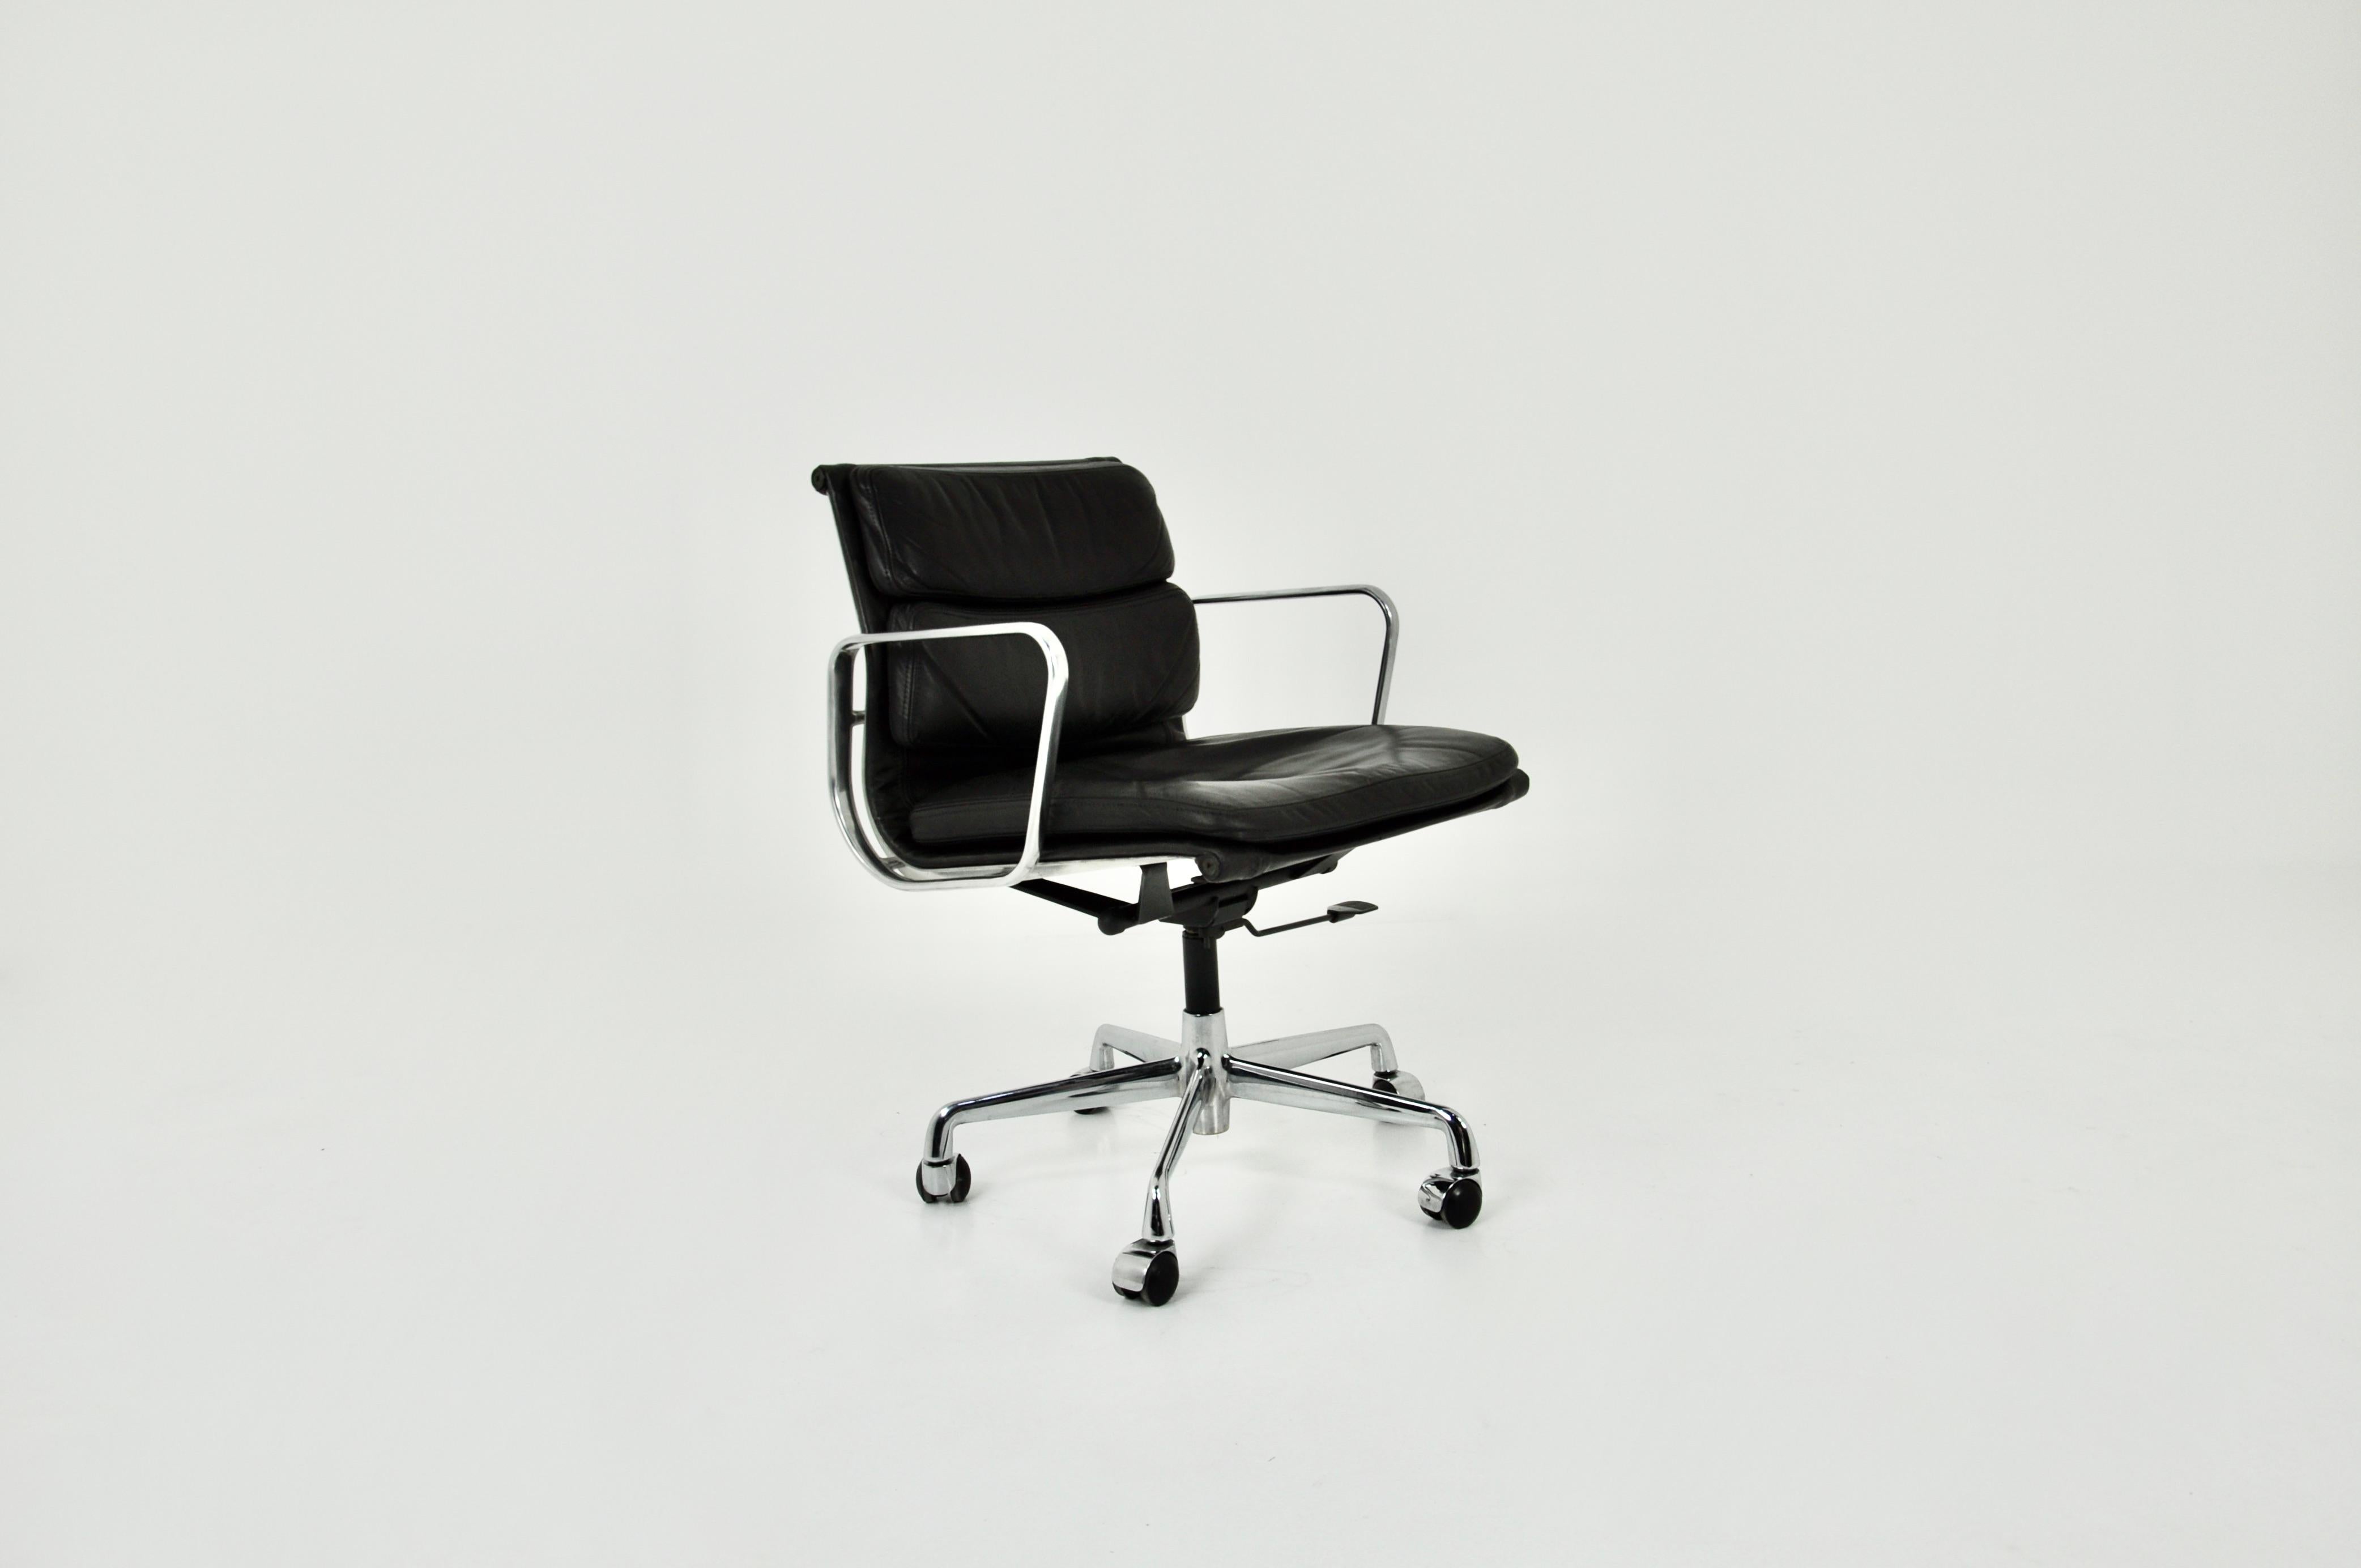 Black leather and aluminium chair. Stamped ICF. Height adjustable. Maximum height: 92 cm, minimum: 81 cm. Seat height: 48 cm. Wear due to time and age of the chair.